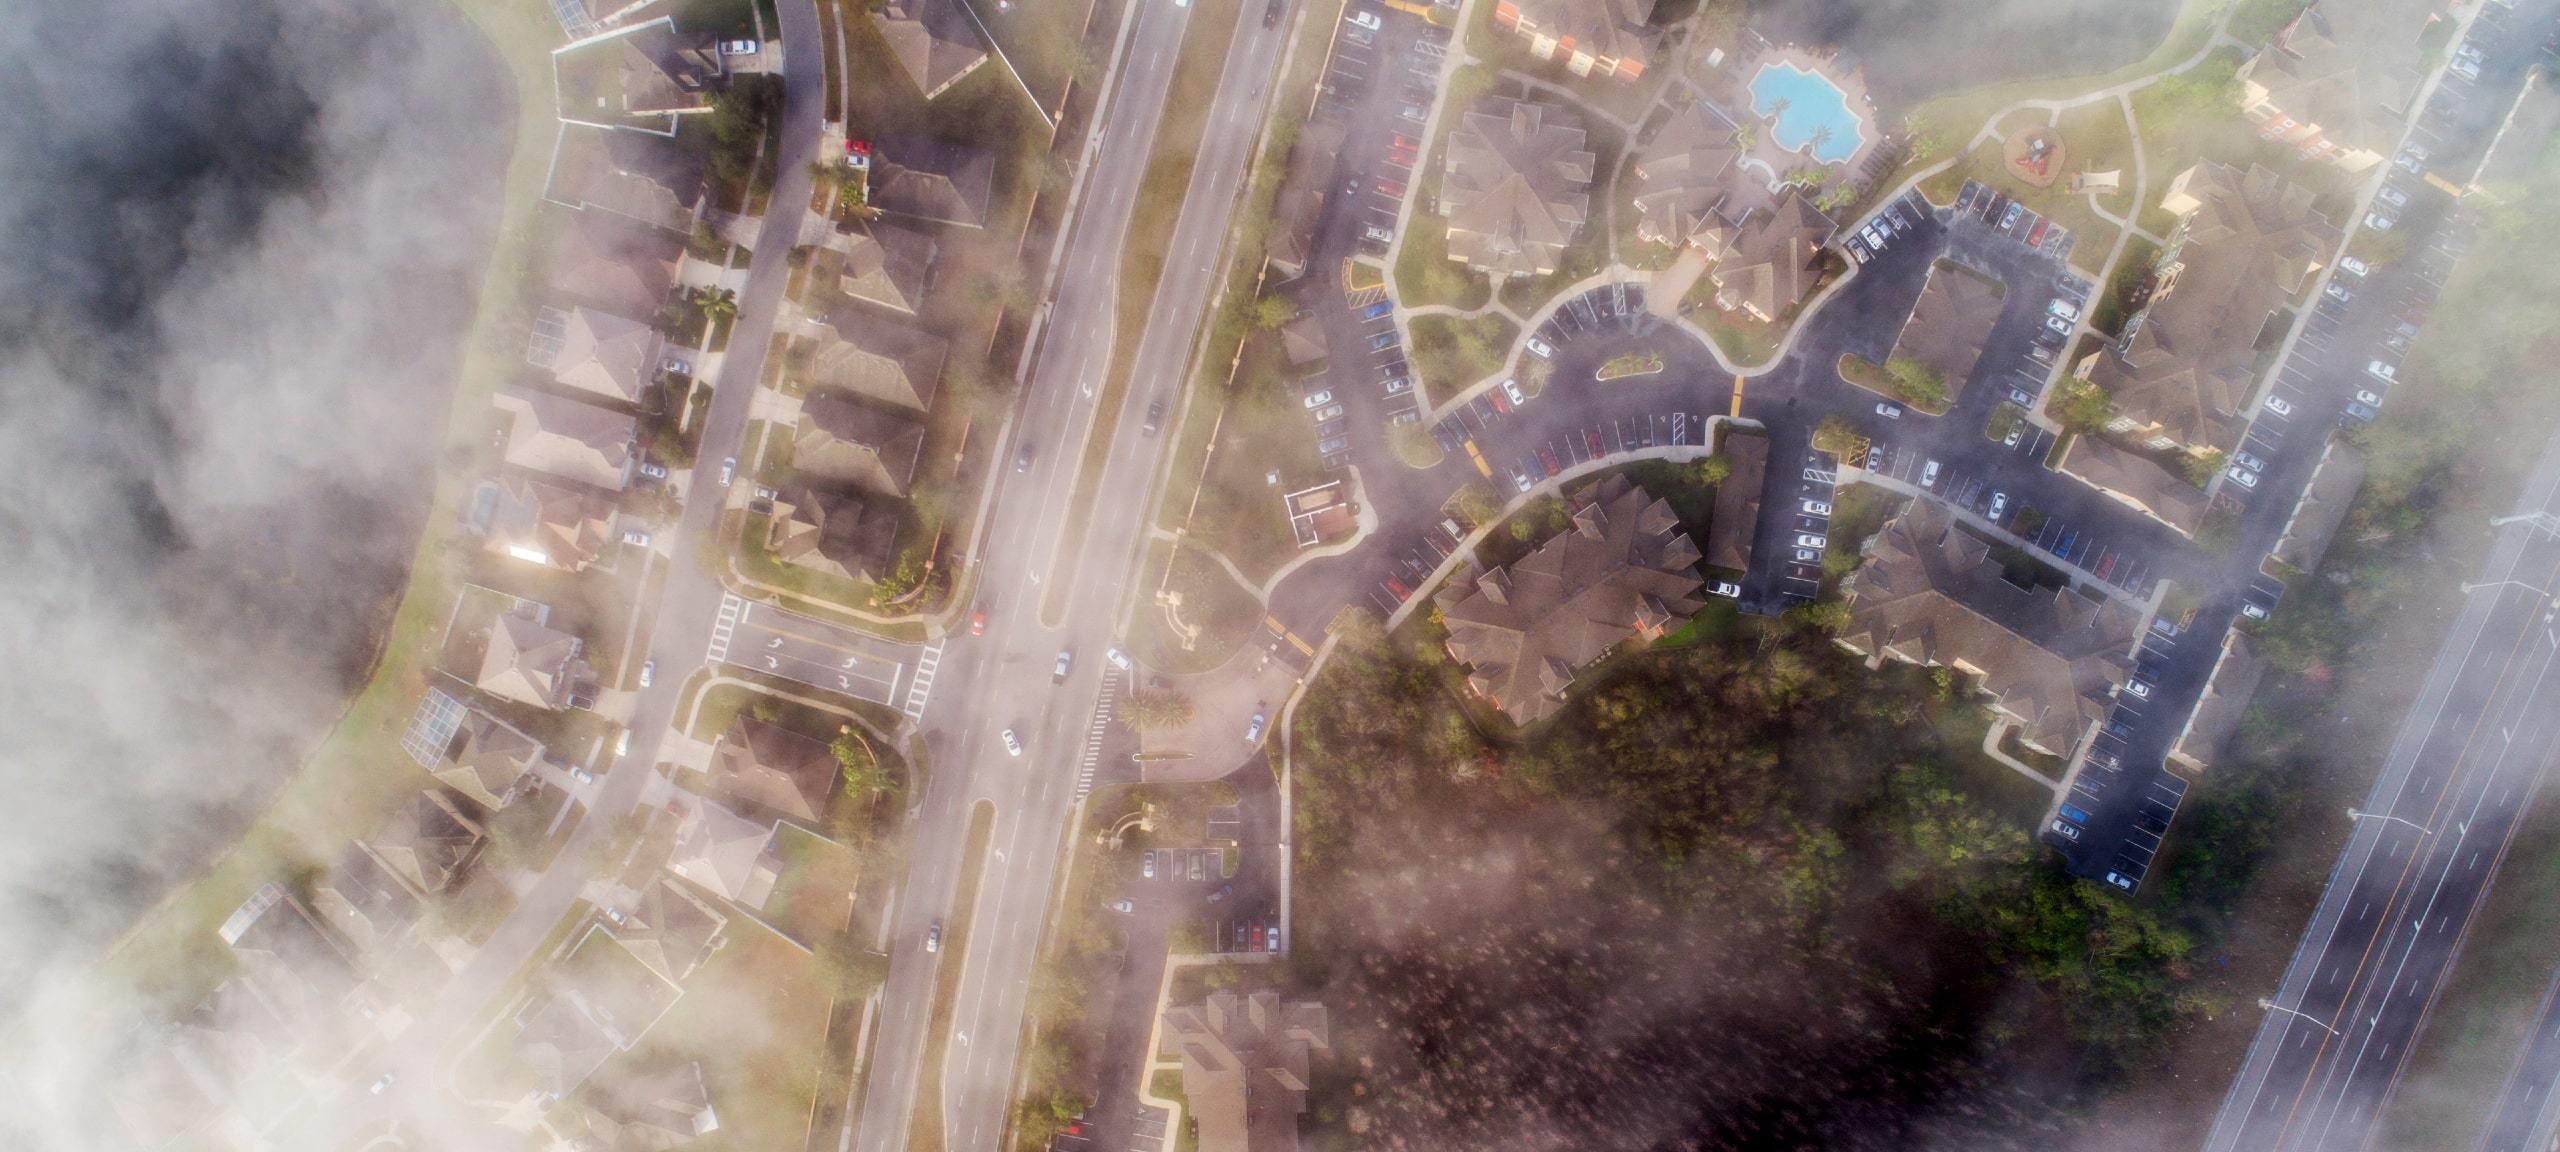 Foggy aerial view over homes in Hunters Creek, Florida